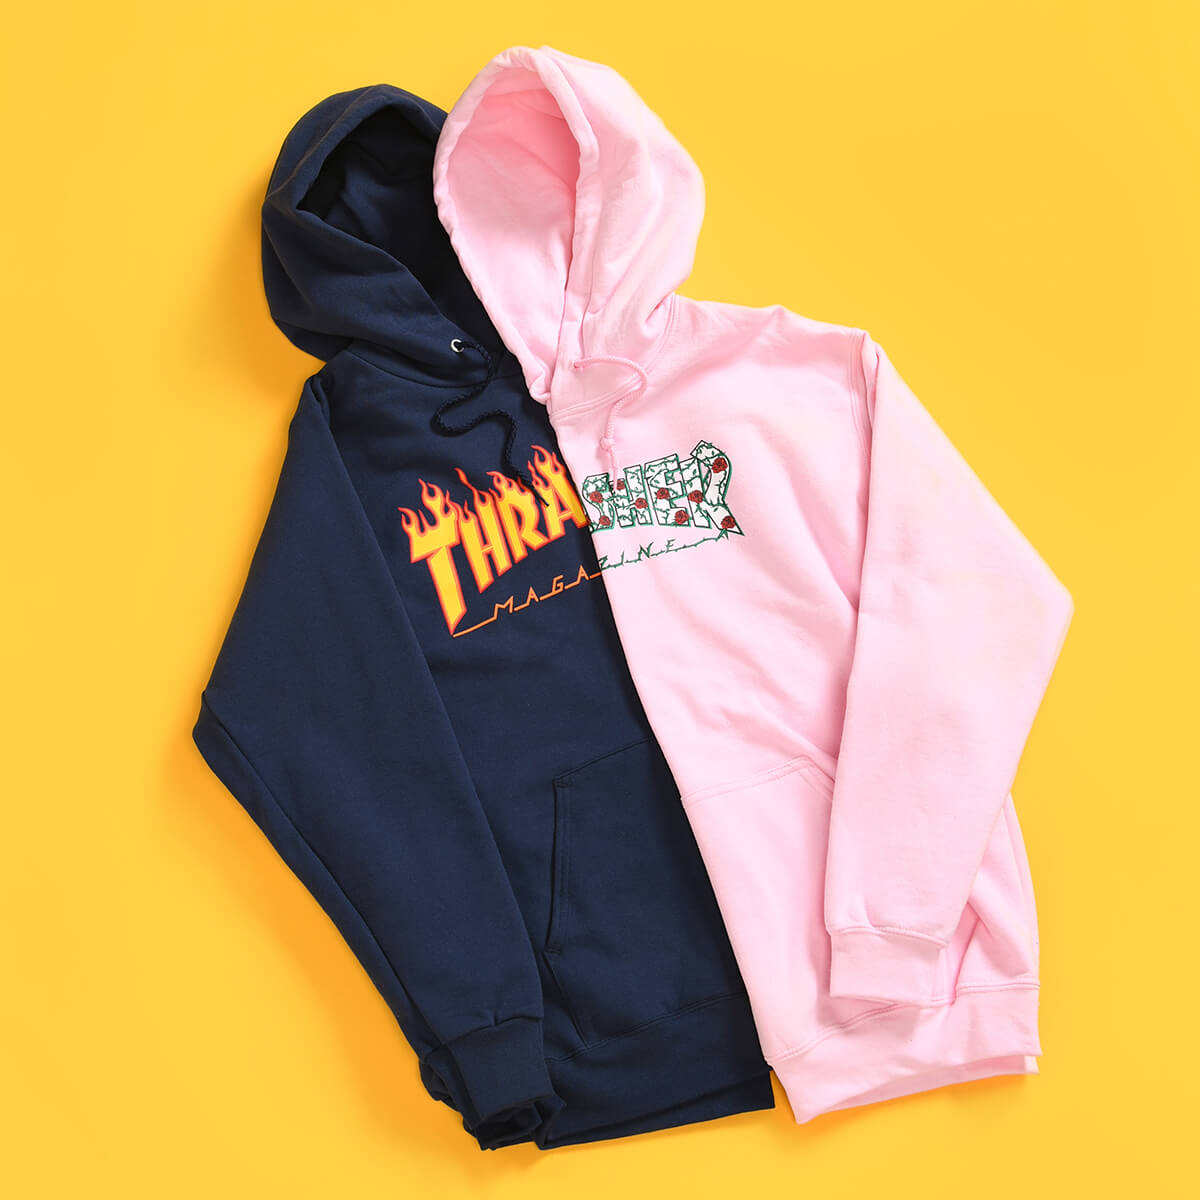 THRASHER IS THE GIFT OF THE SEASON - SHOP THRASHER